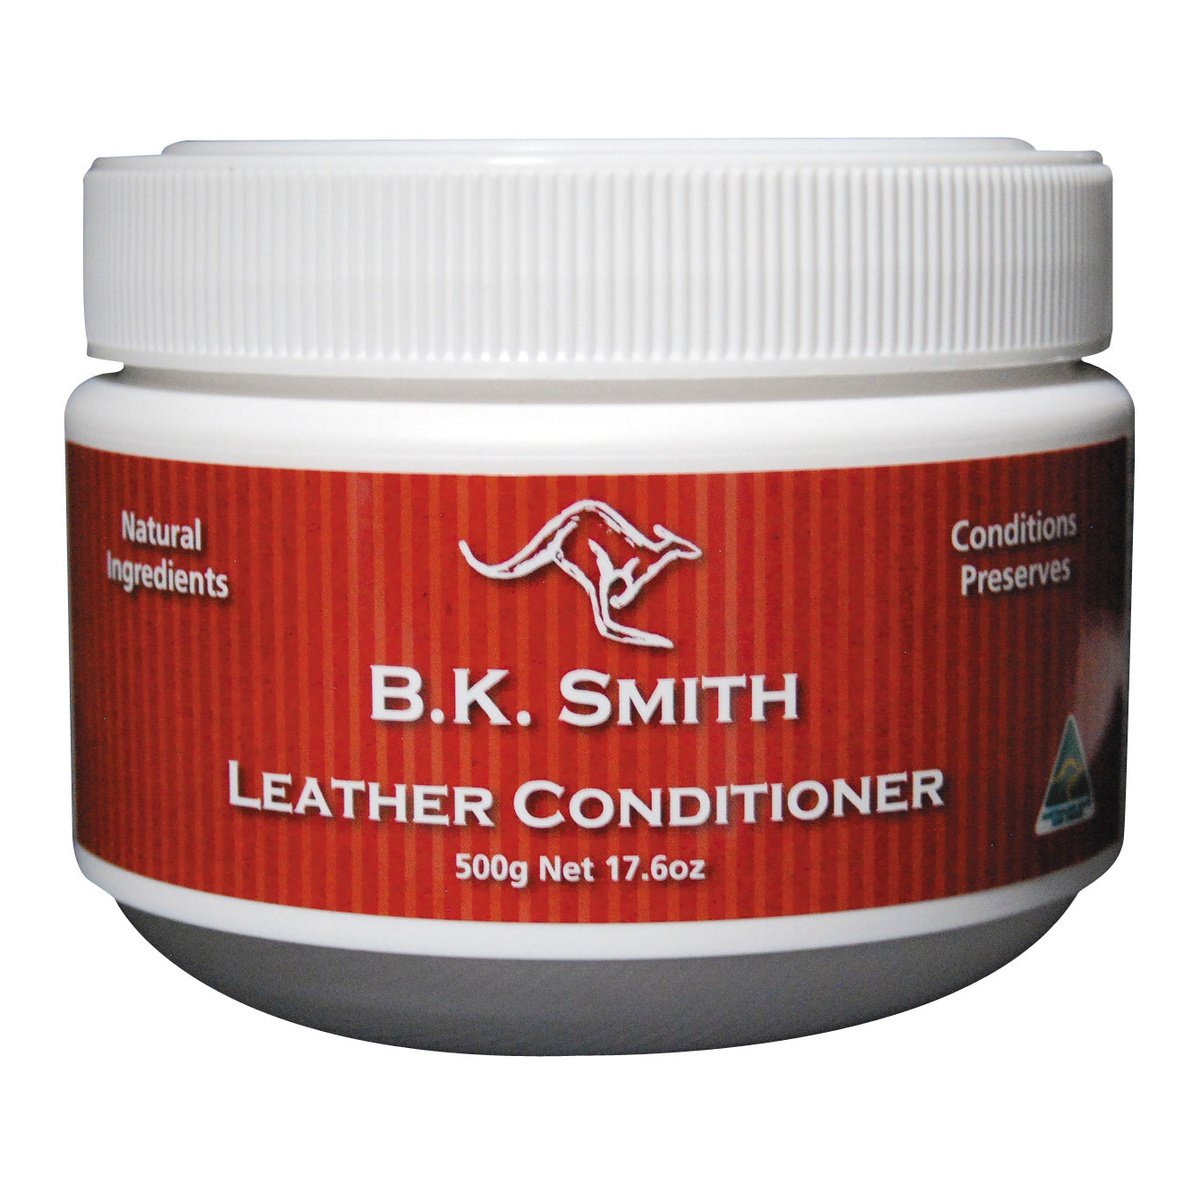 B.K.Smith Leather Conditioner- 500g